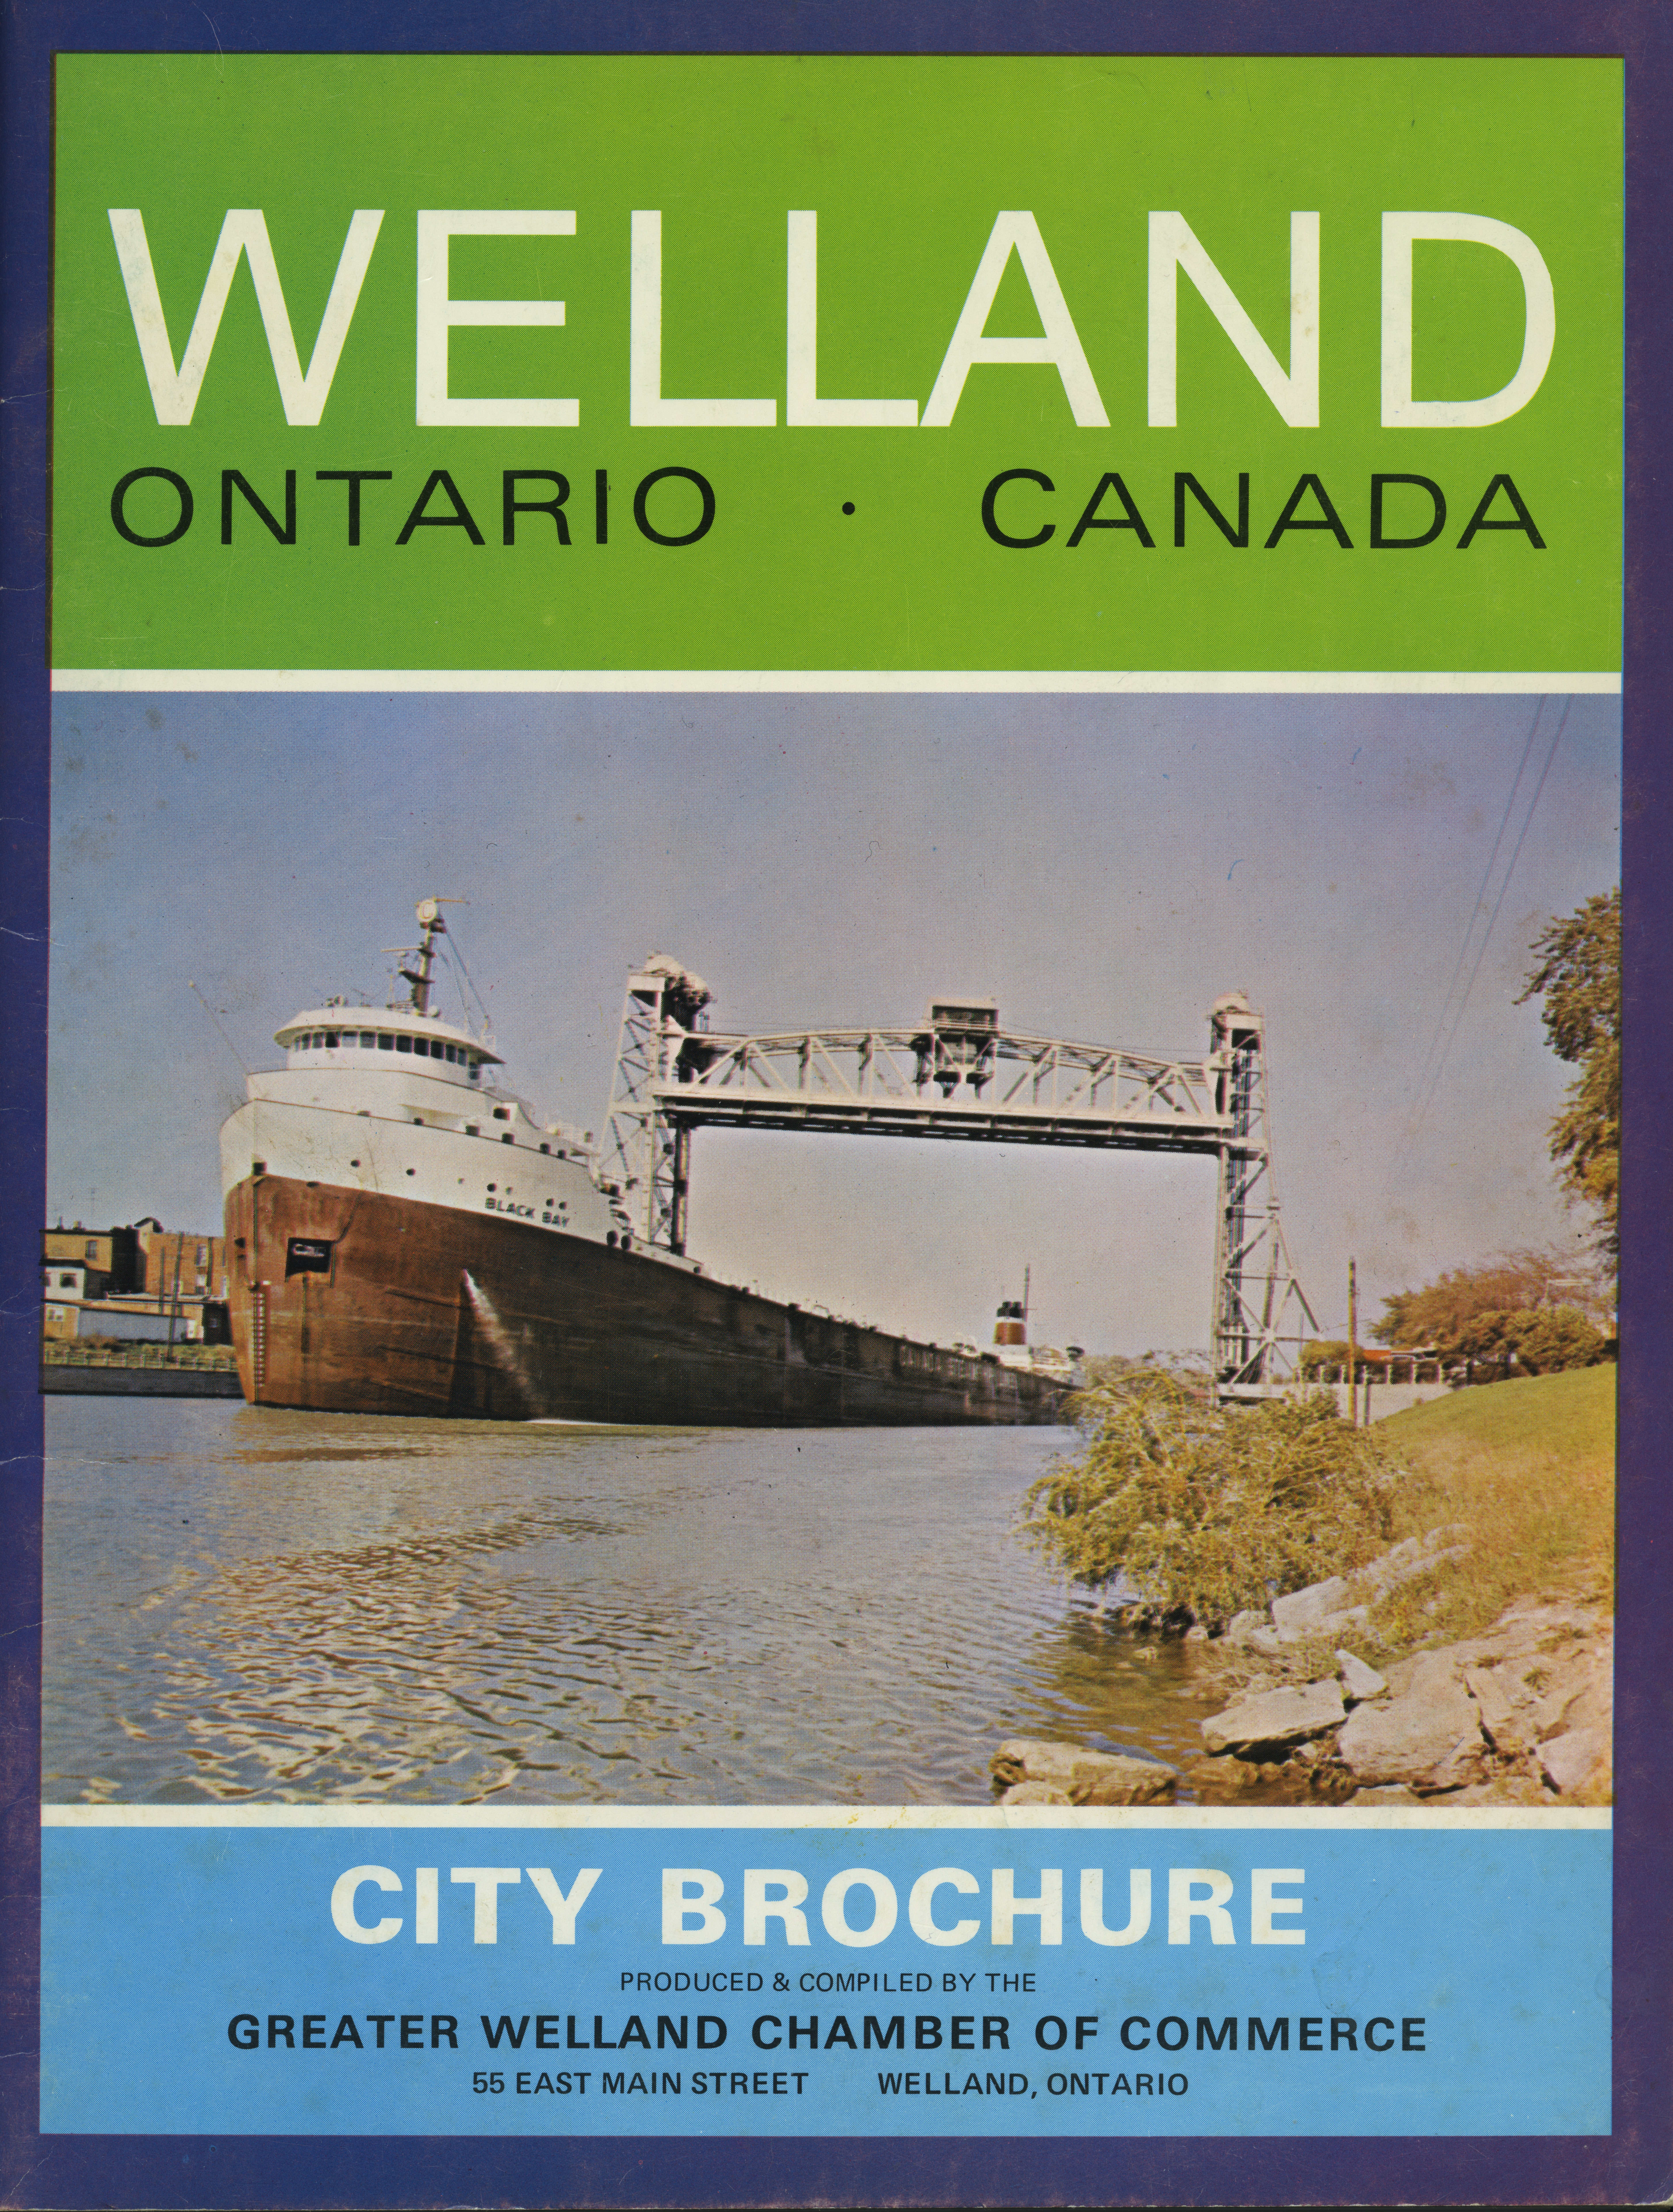 The front cover of a Welland city brochure, with a colour photo of a ship on the canal.